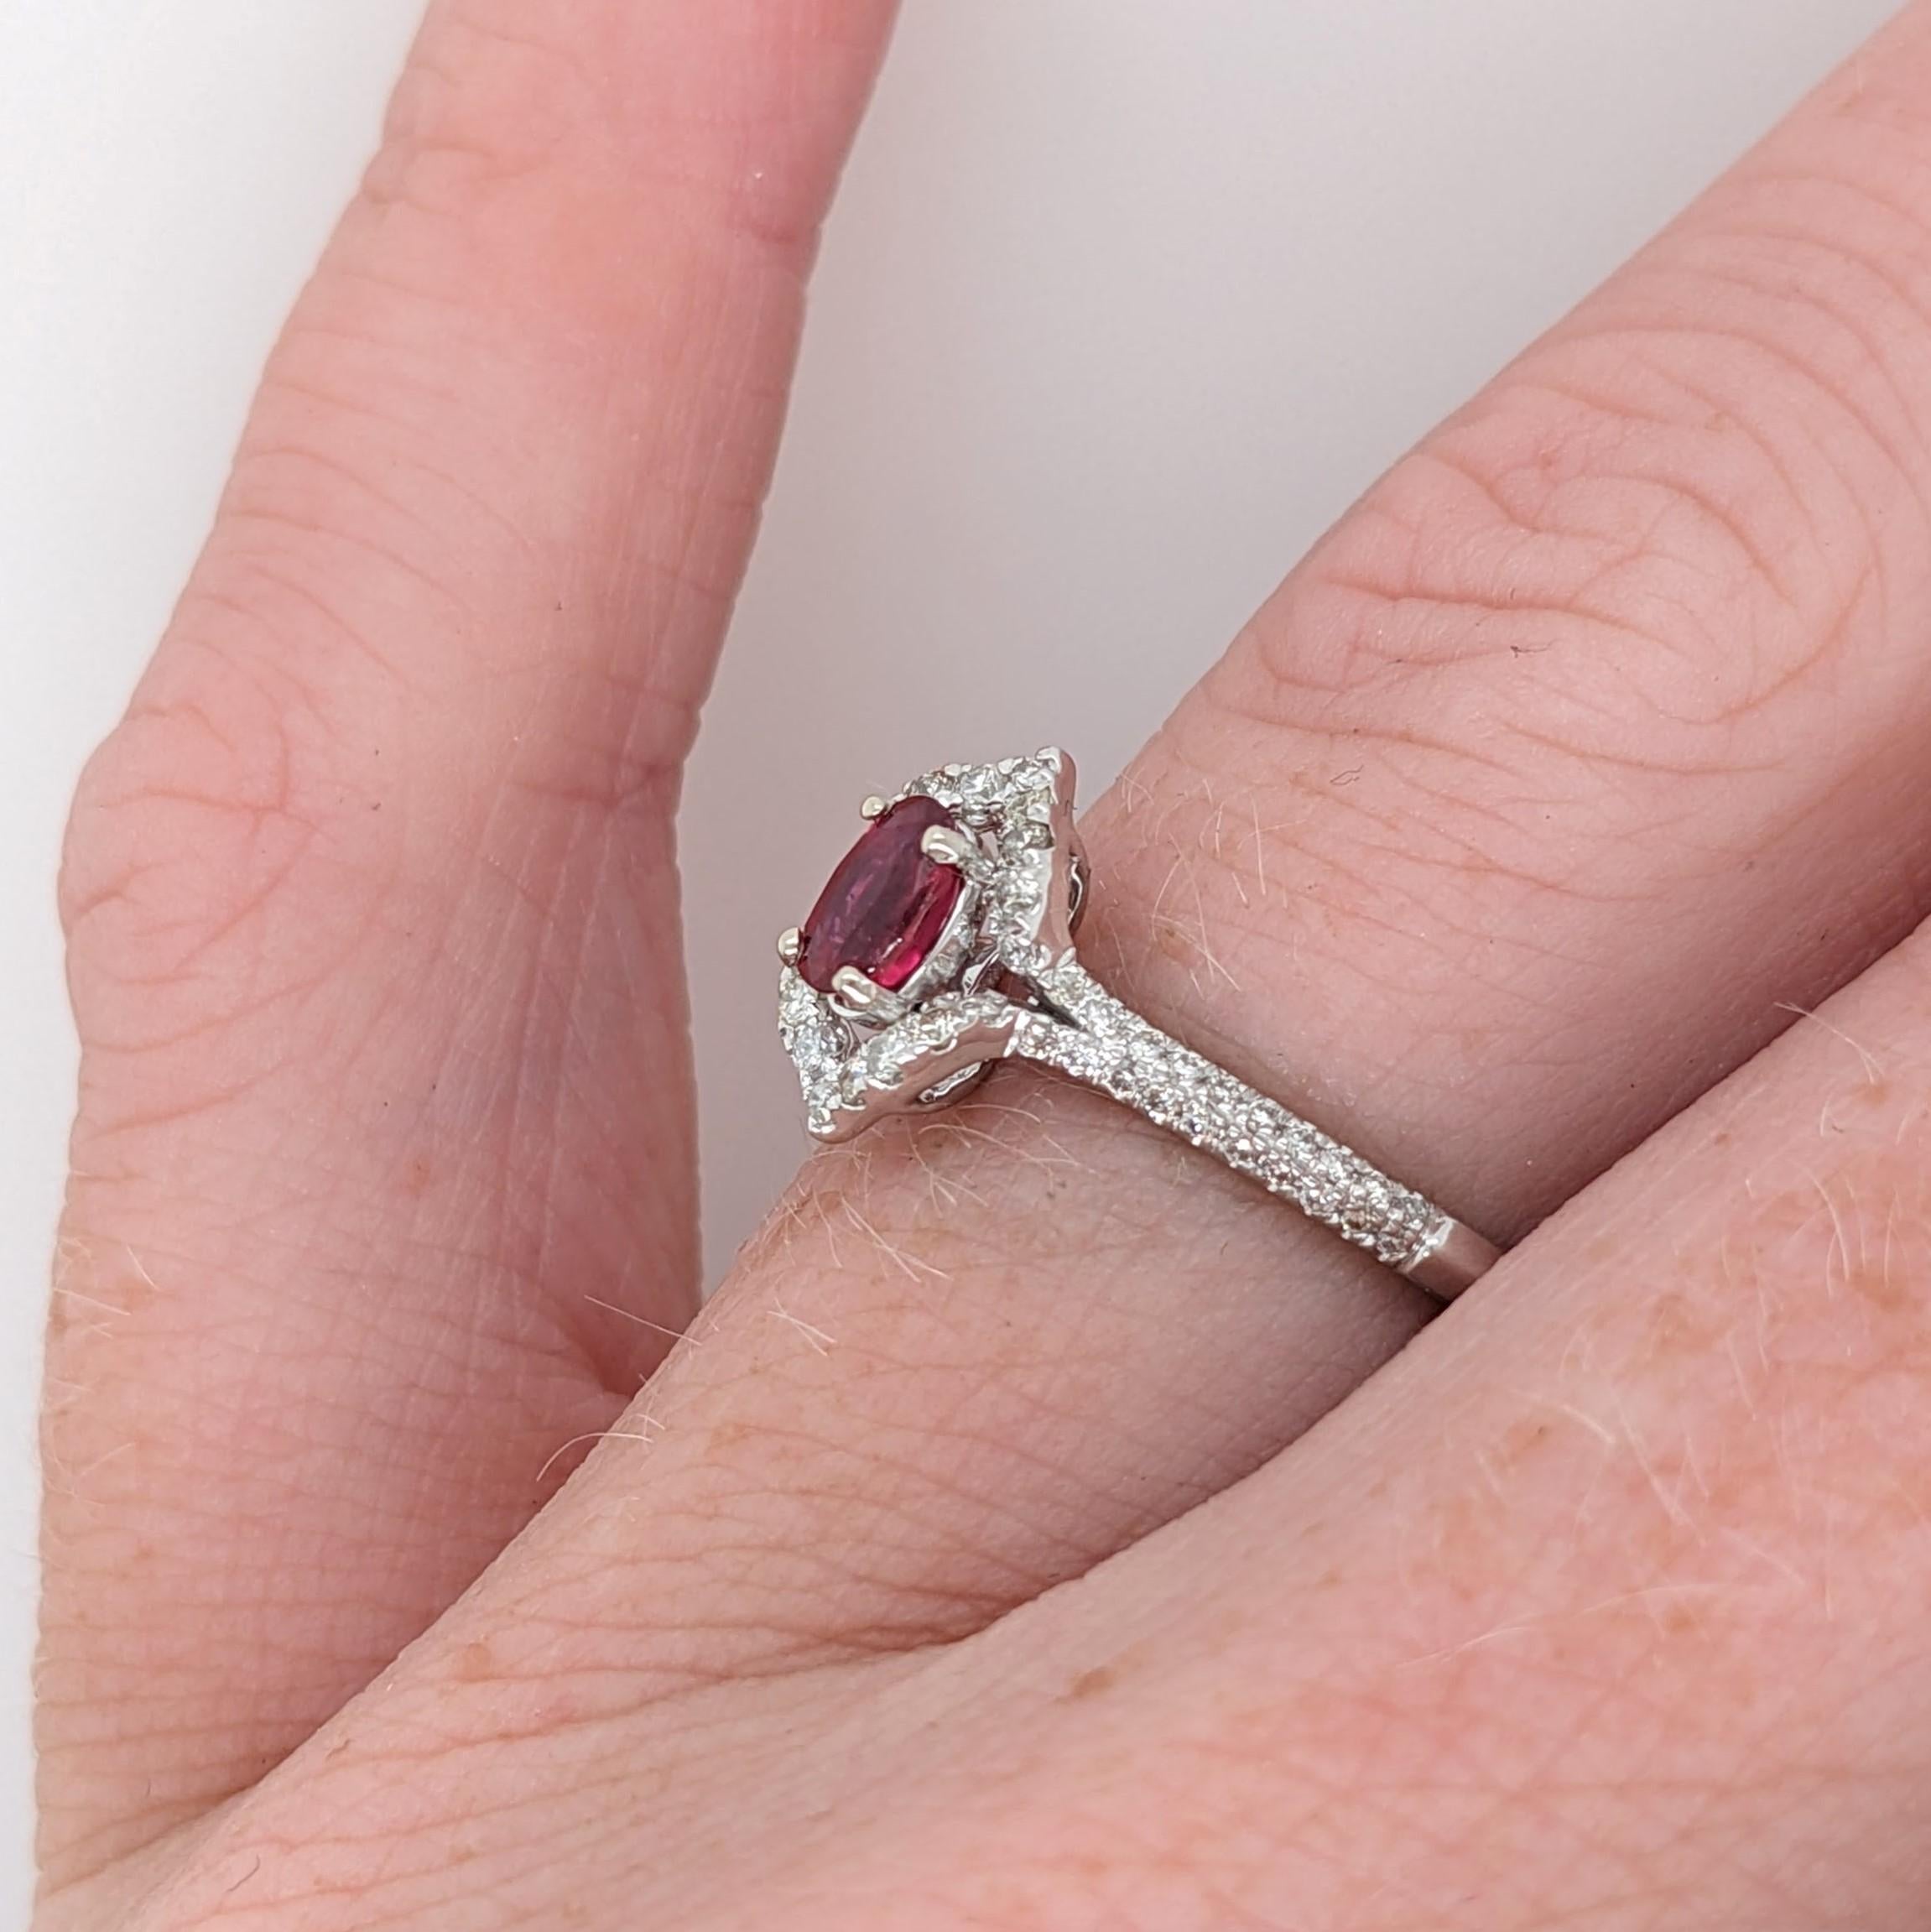 Vintage Inspired Ruby Ring w Diamond Halo in 14K White Gold Oval 5x3.5mm 3